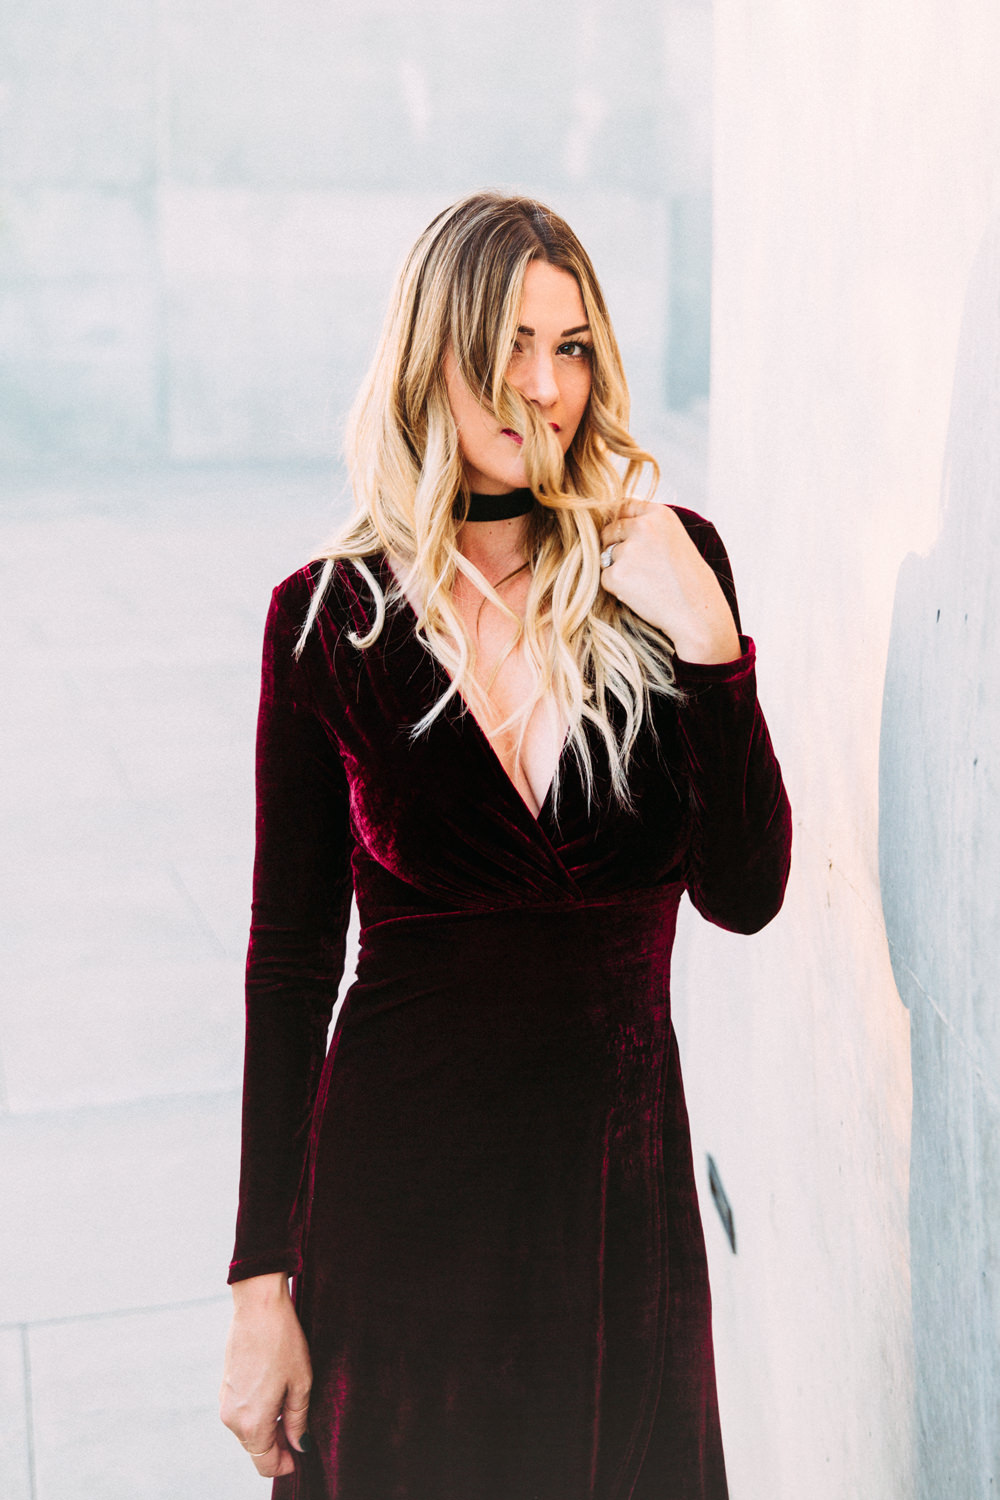 Caitlin Lindquist of the fashion blog Dash of Darling shares her favorite affordable holiday party dresses from Lulus.